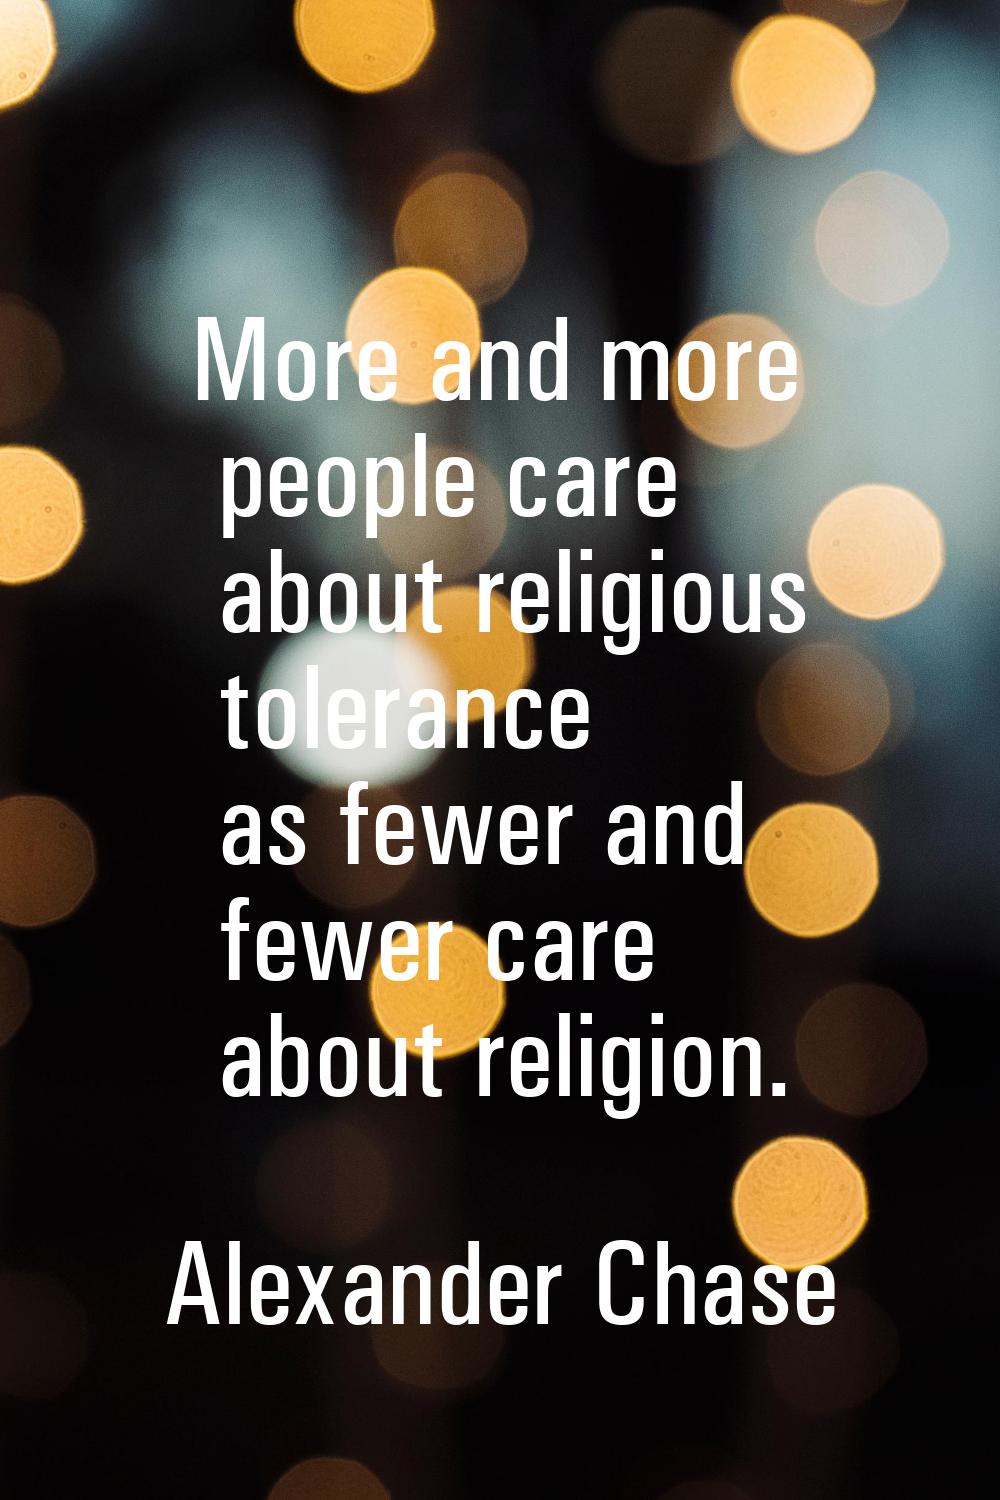 More and more people care about religious tolerance as fewer and fewer care about religion.